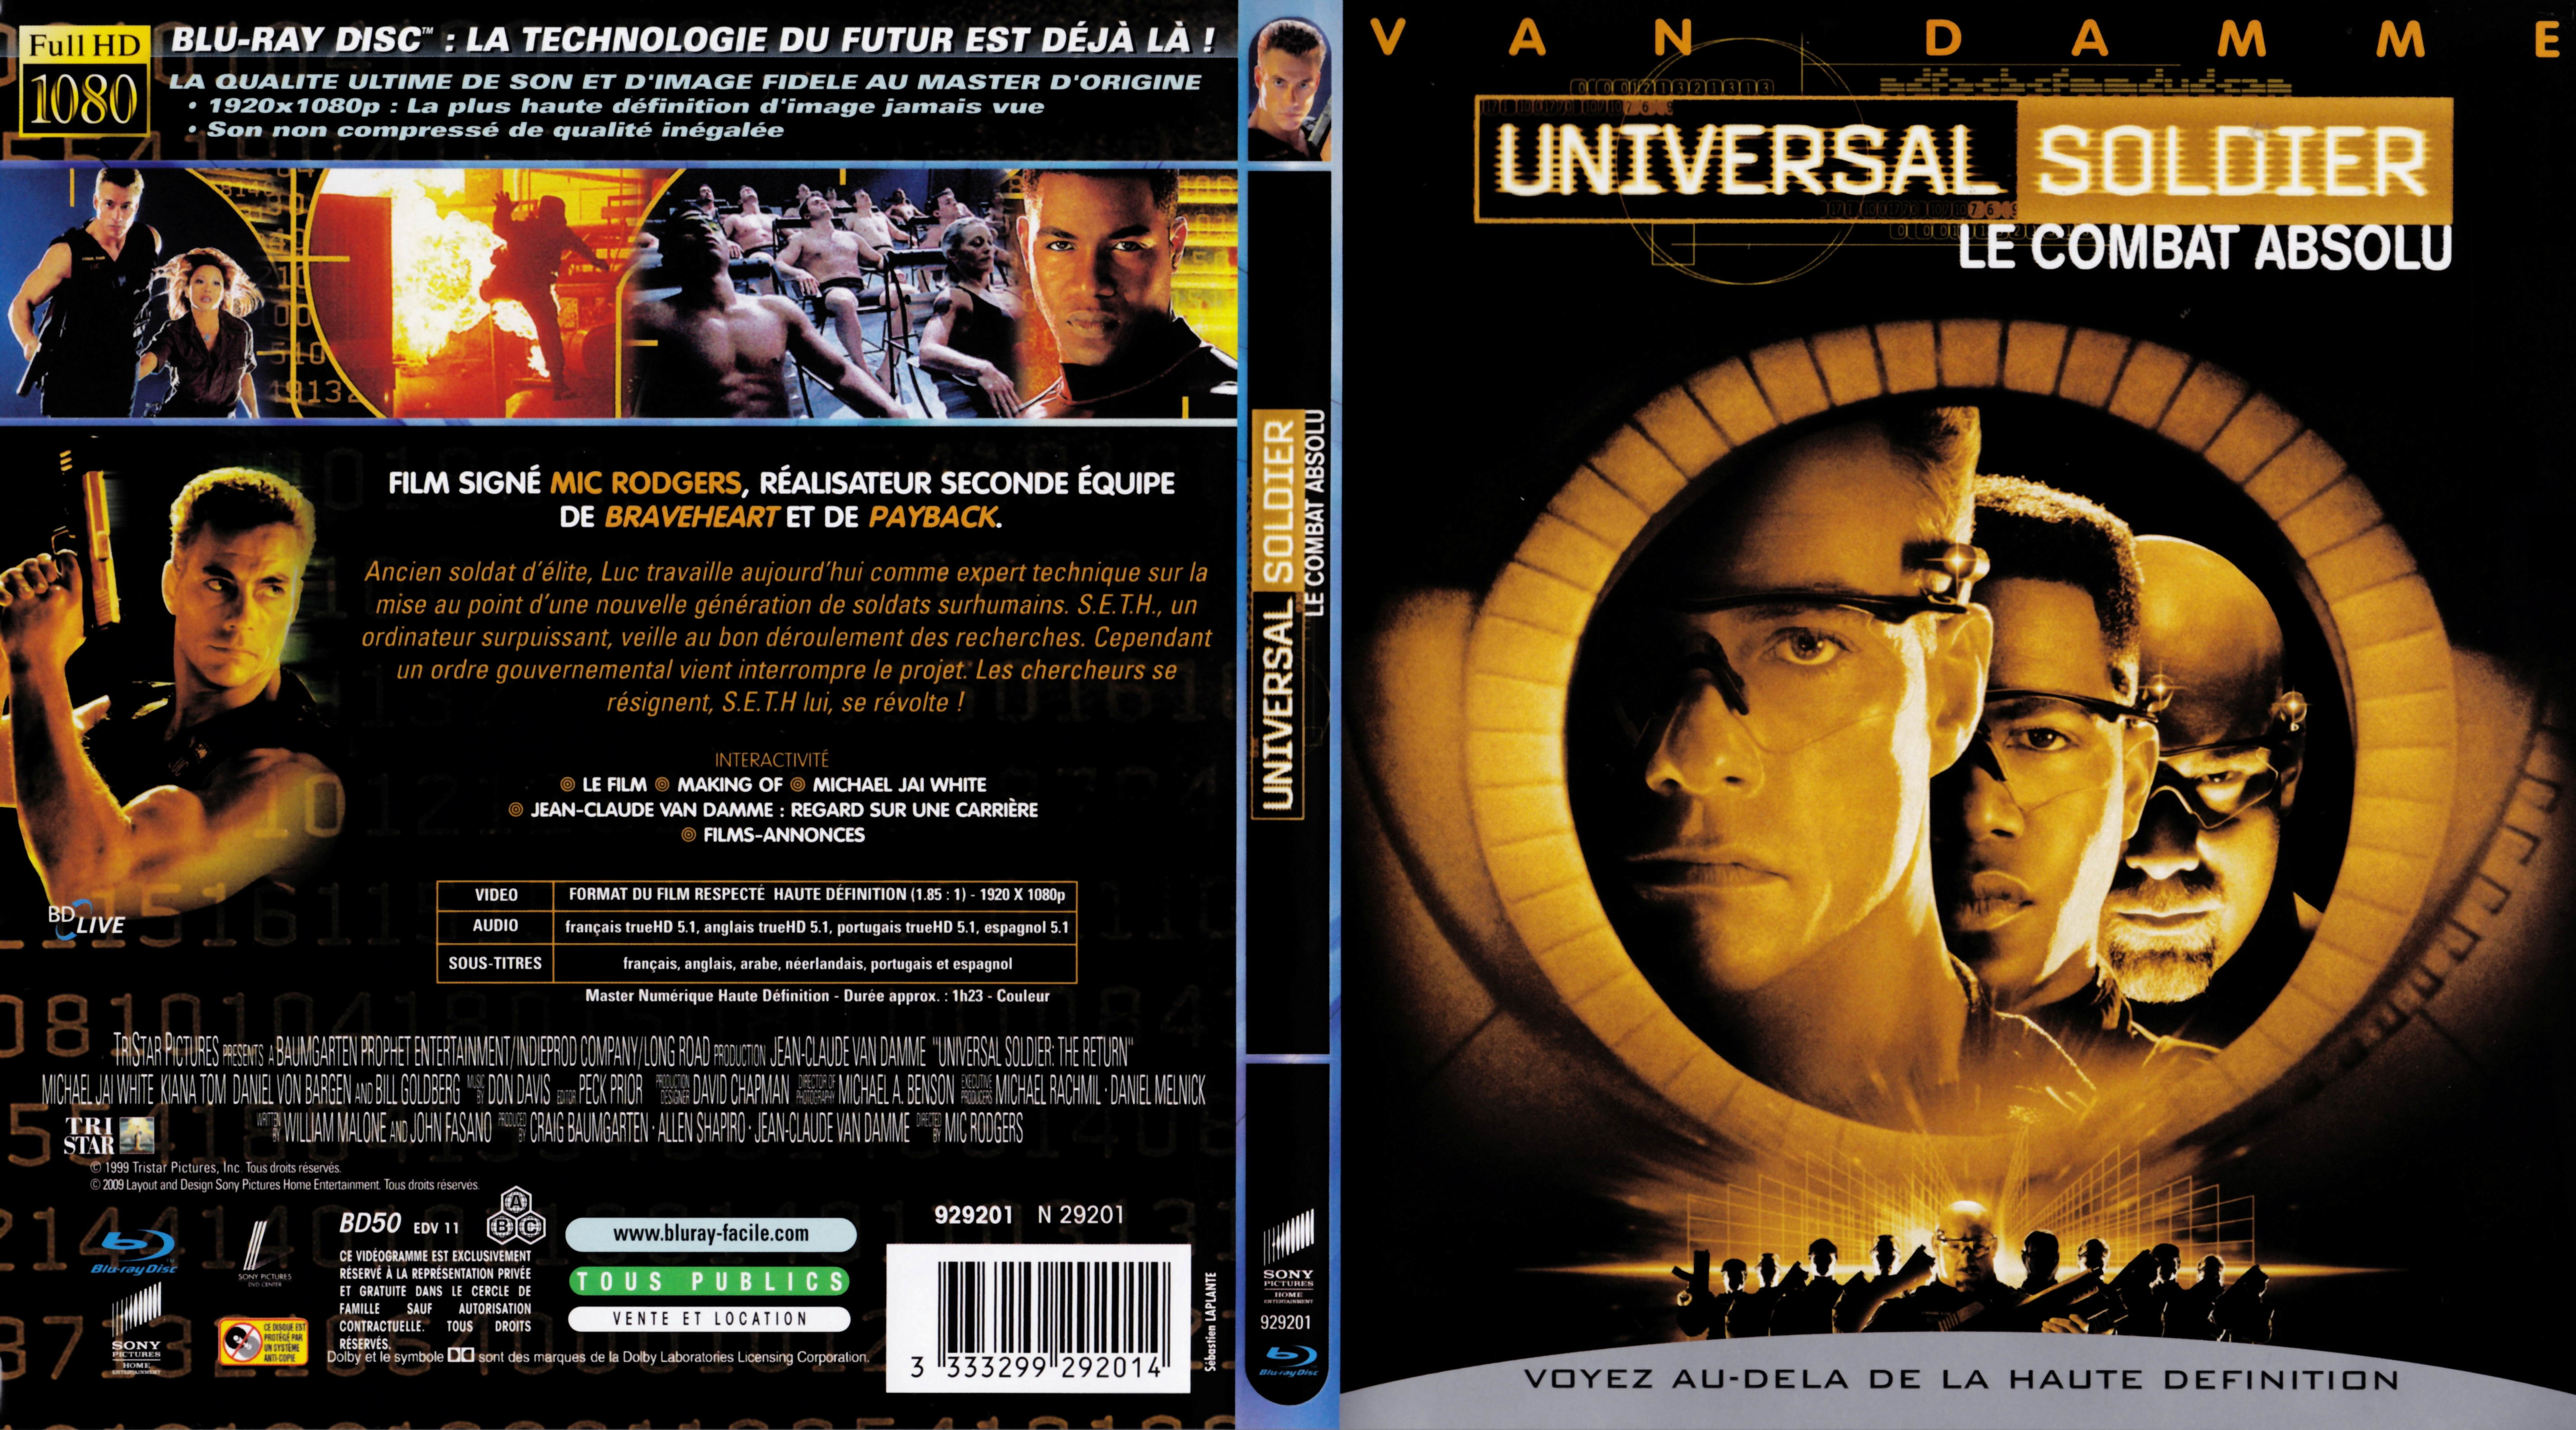 Jaquette DVD Universal soldier Le combat absolu (BLU-RAY)